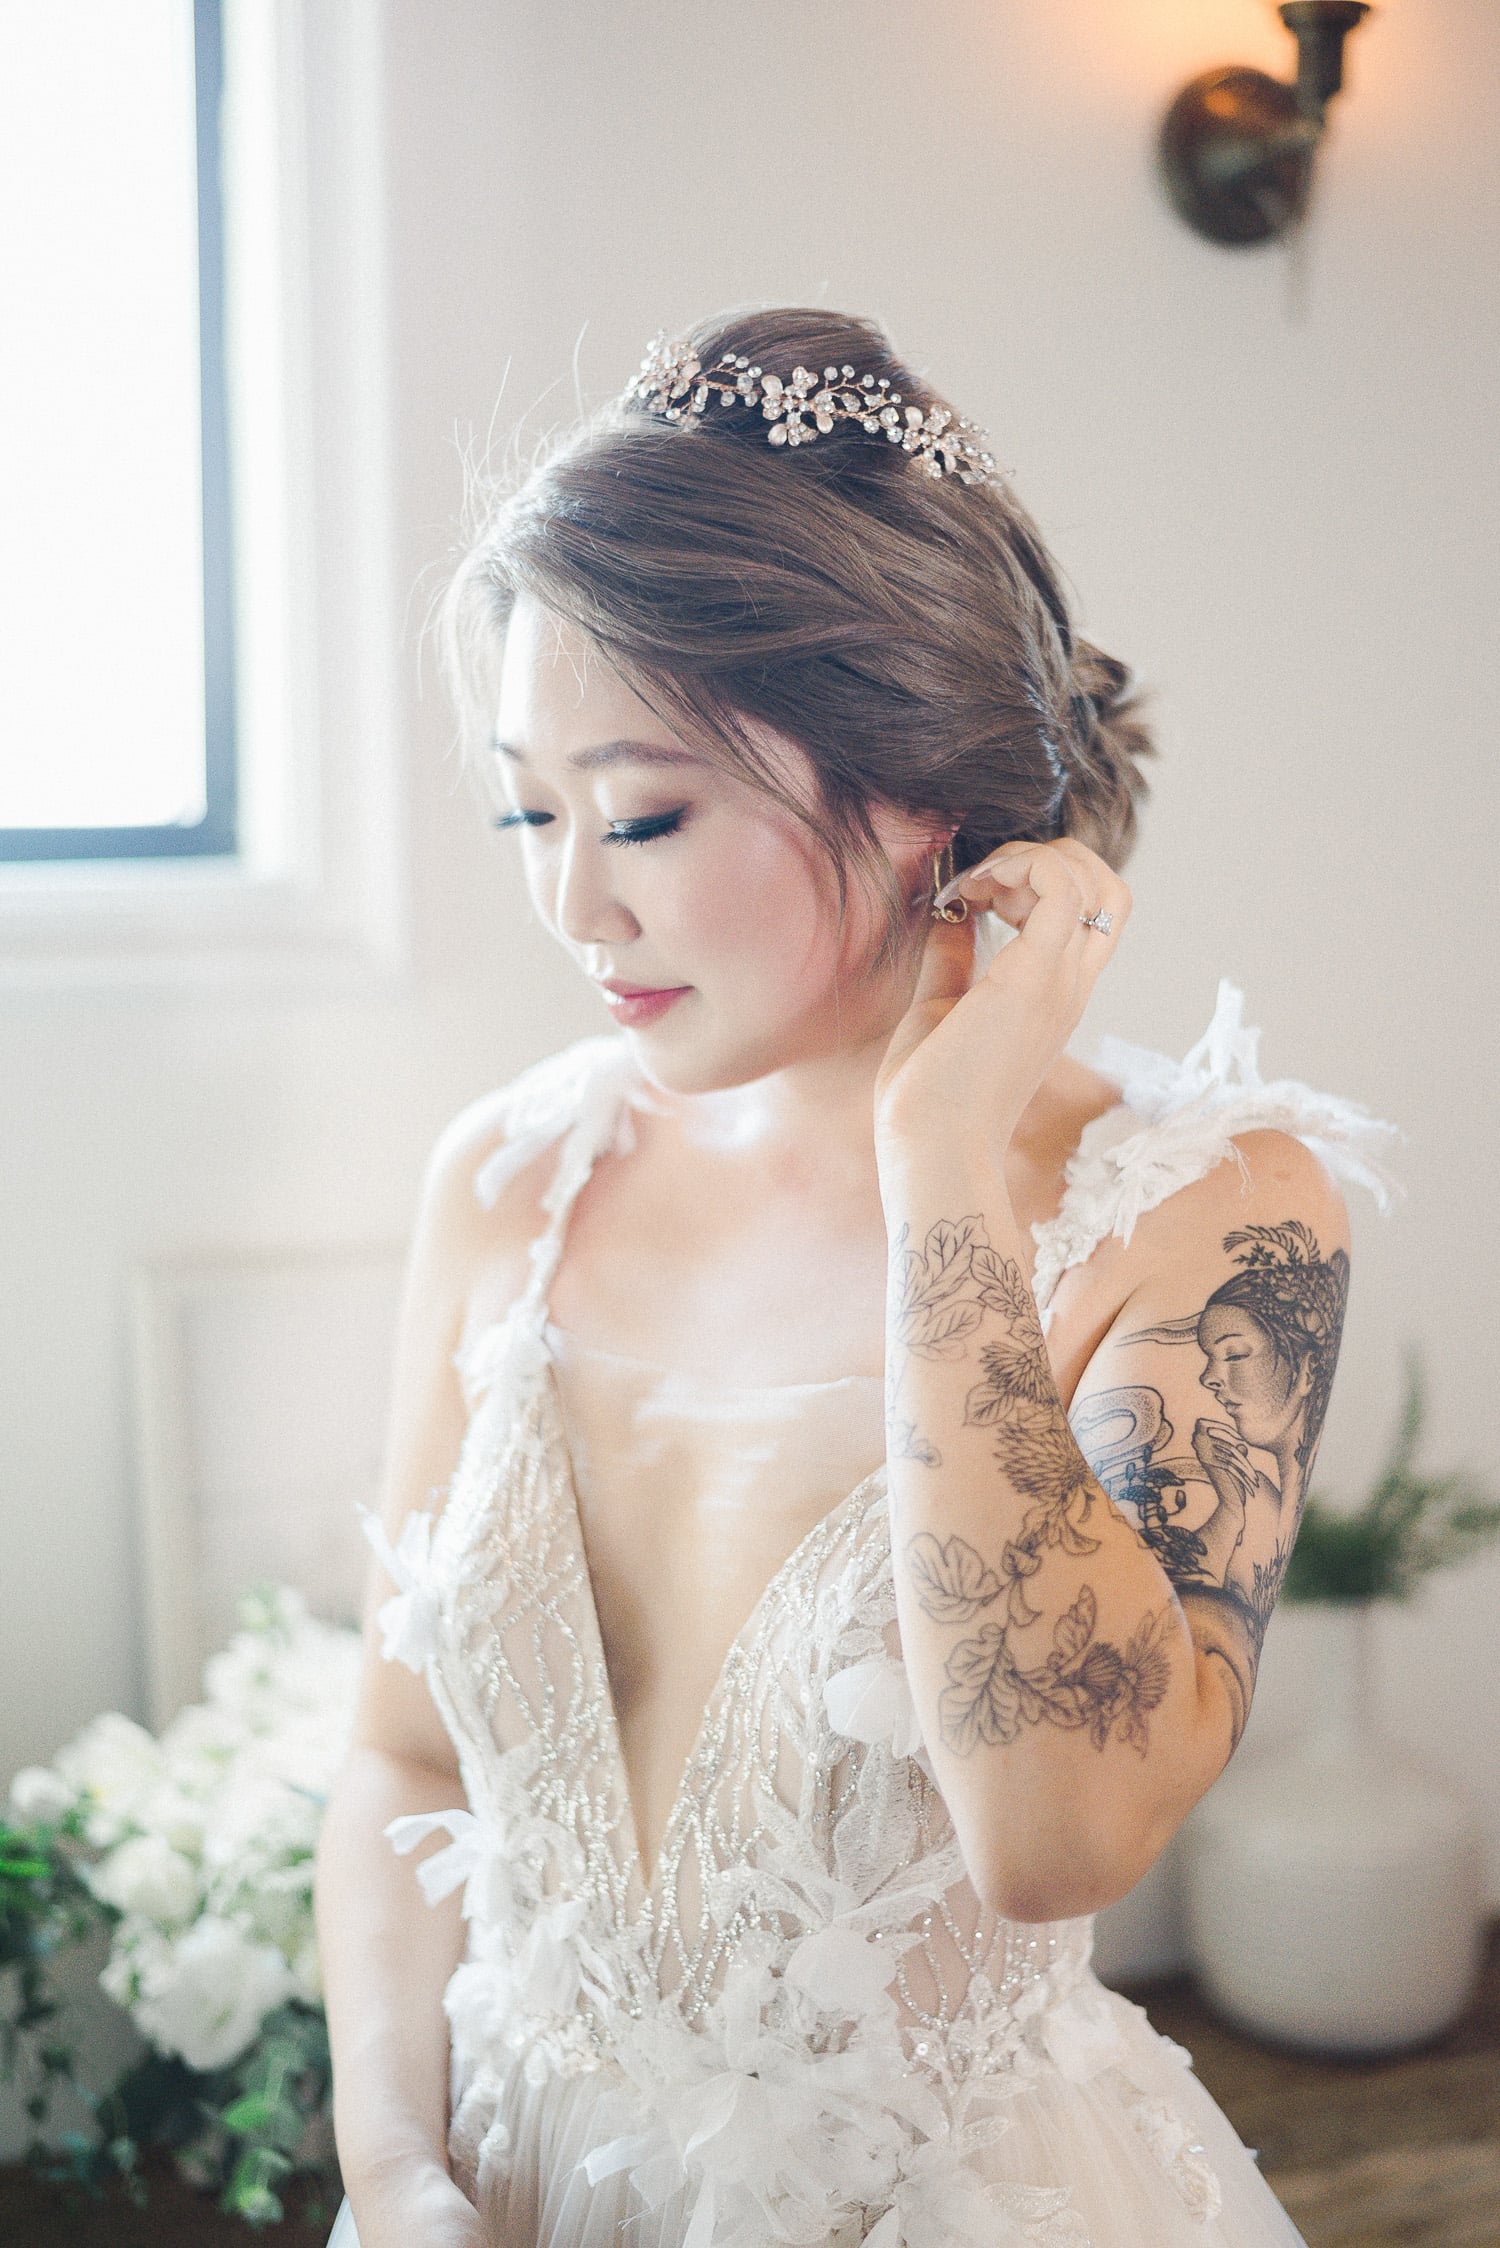 22 Beautiful Brides Who Showed Off Their Tattoos With Pride  Brides with  tattoos Beautiful bride Bride